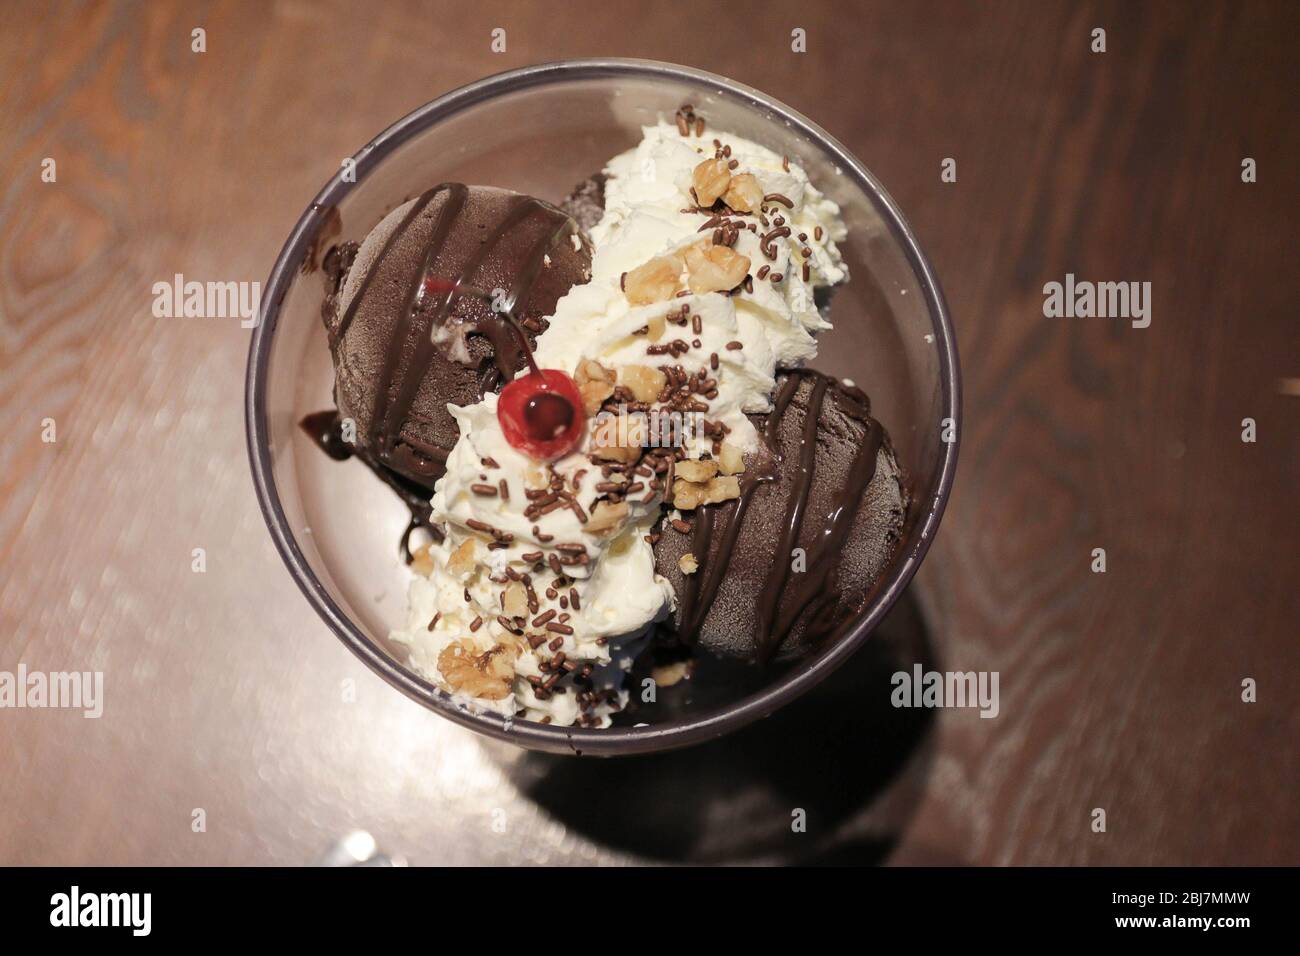 Top view image of Chocolate ice cream in a bowl with whipping cream and cherry on top Stock Photo